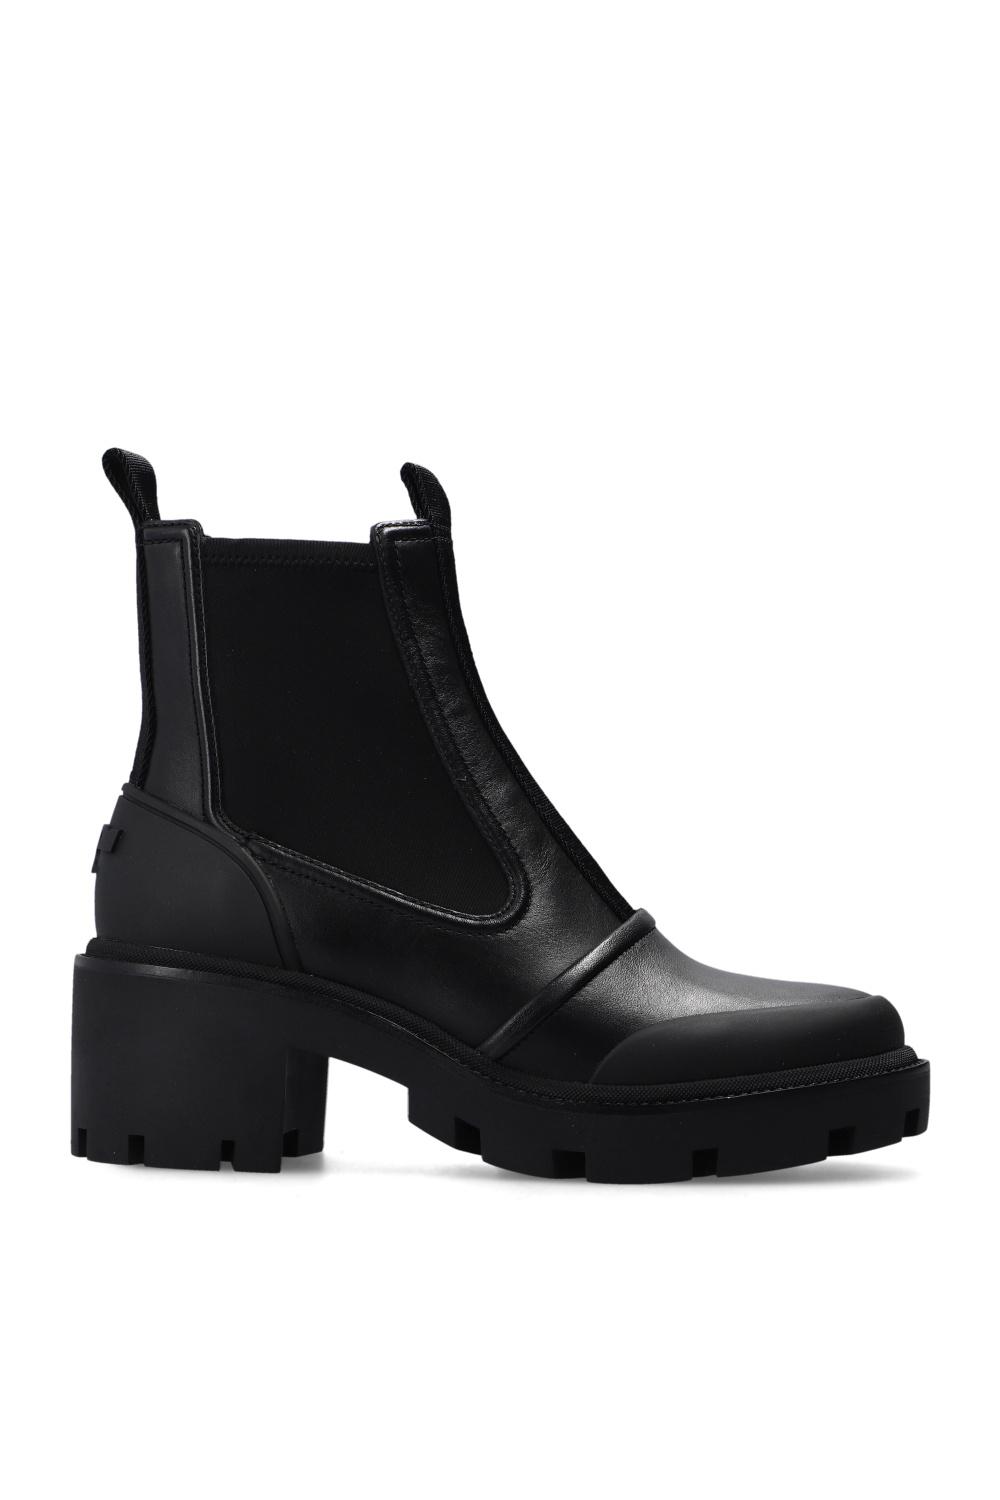 Tory Burch Chelsea Lug Sole Ankle Boots in Black | Lyst